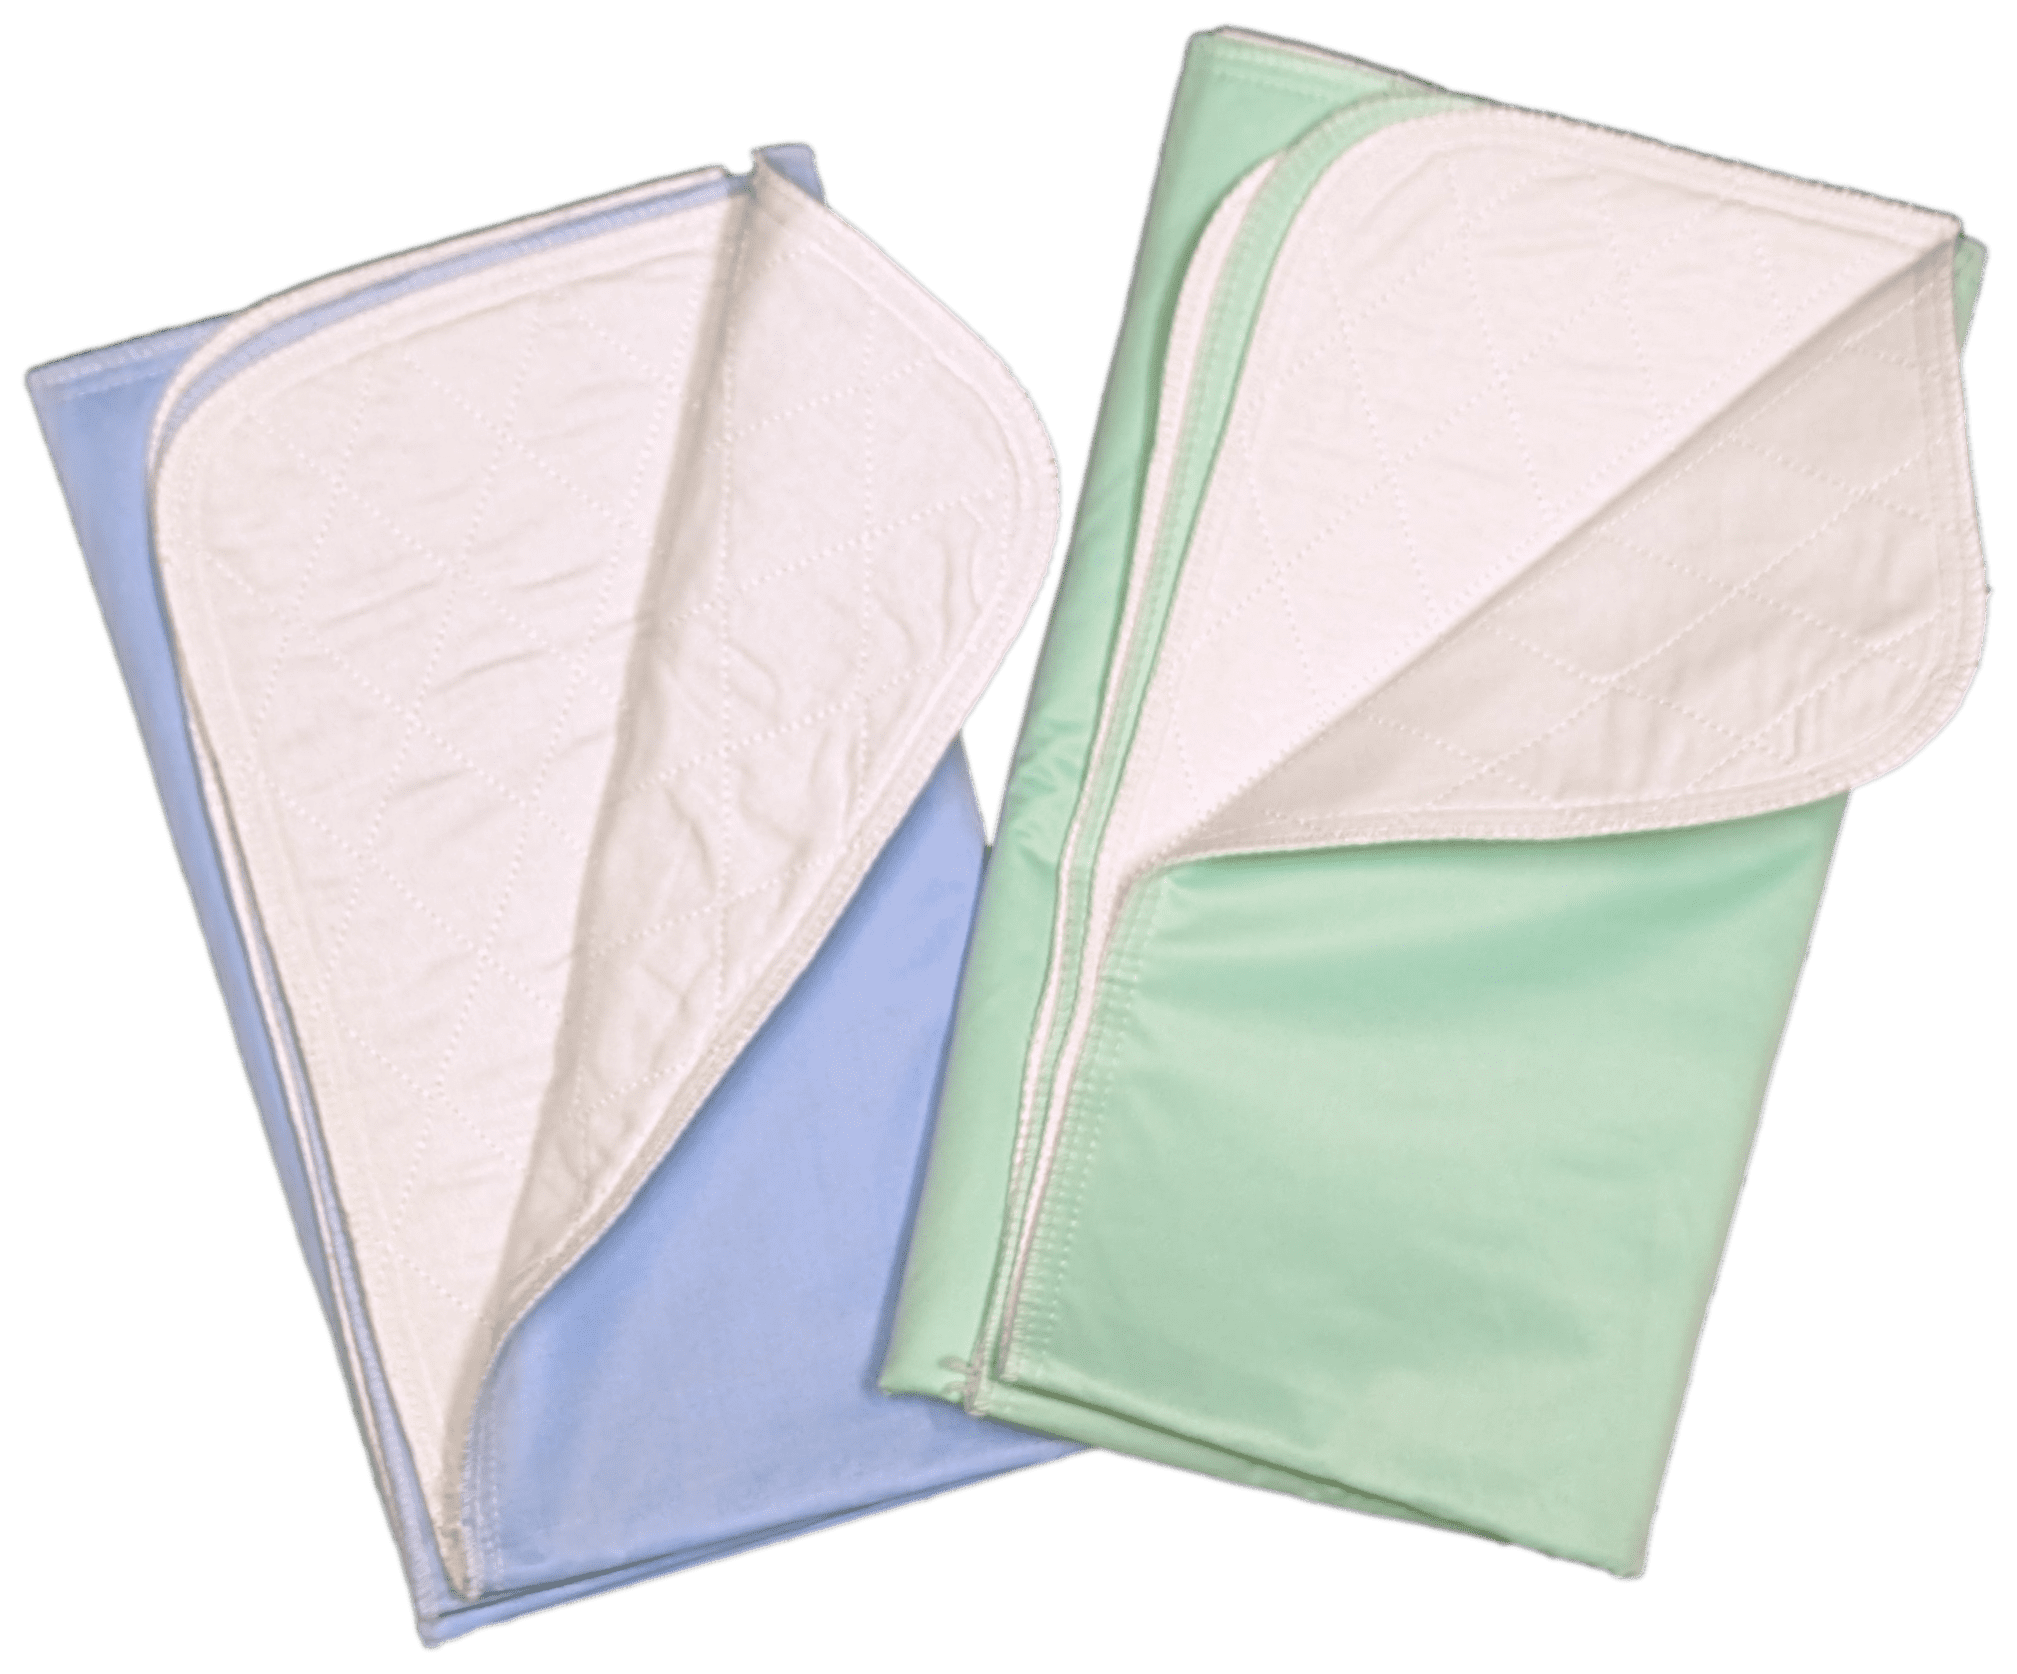 2 Pack - 32x34 Bed Pad Washable Reusable Incontinence Underpad Waterproof  Chucks